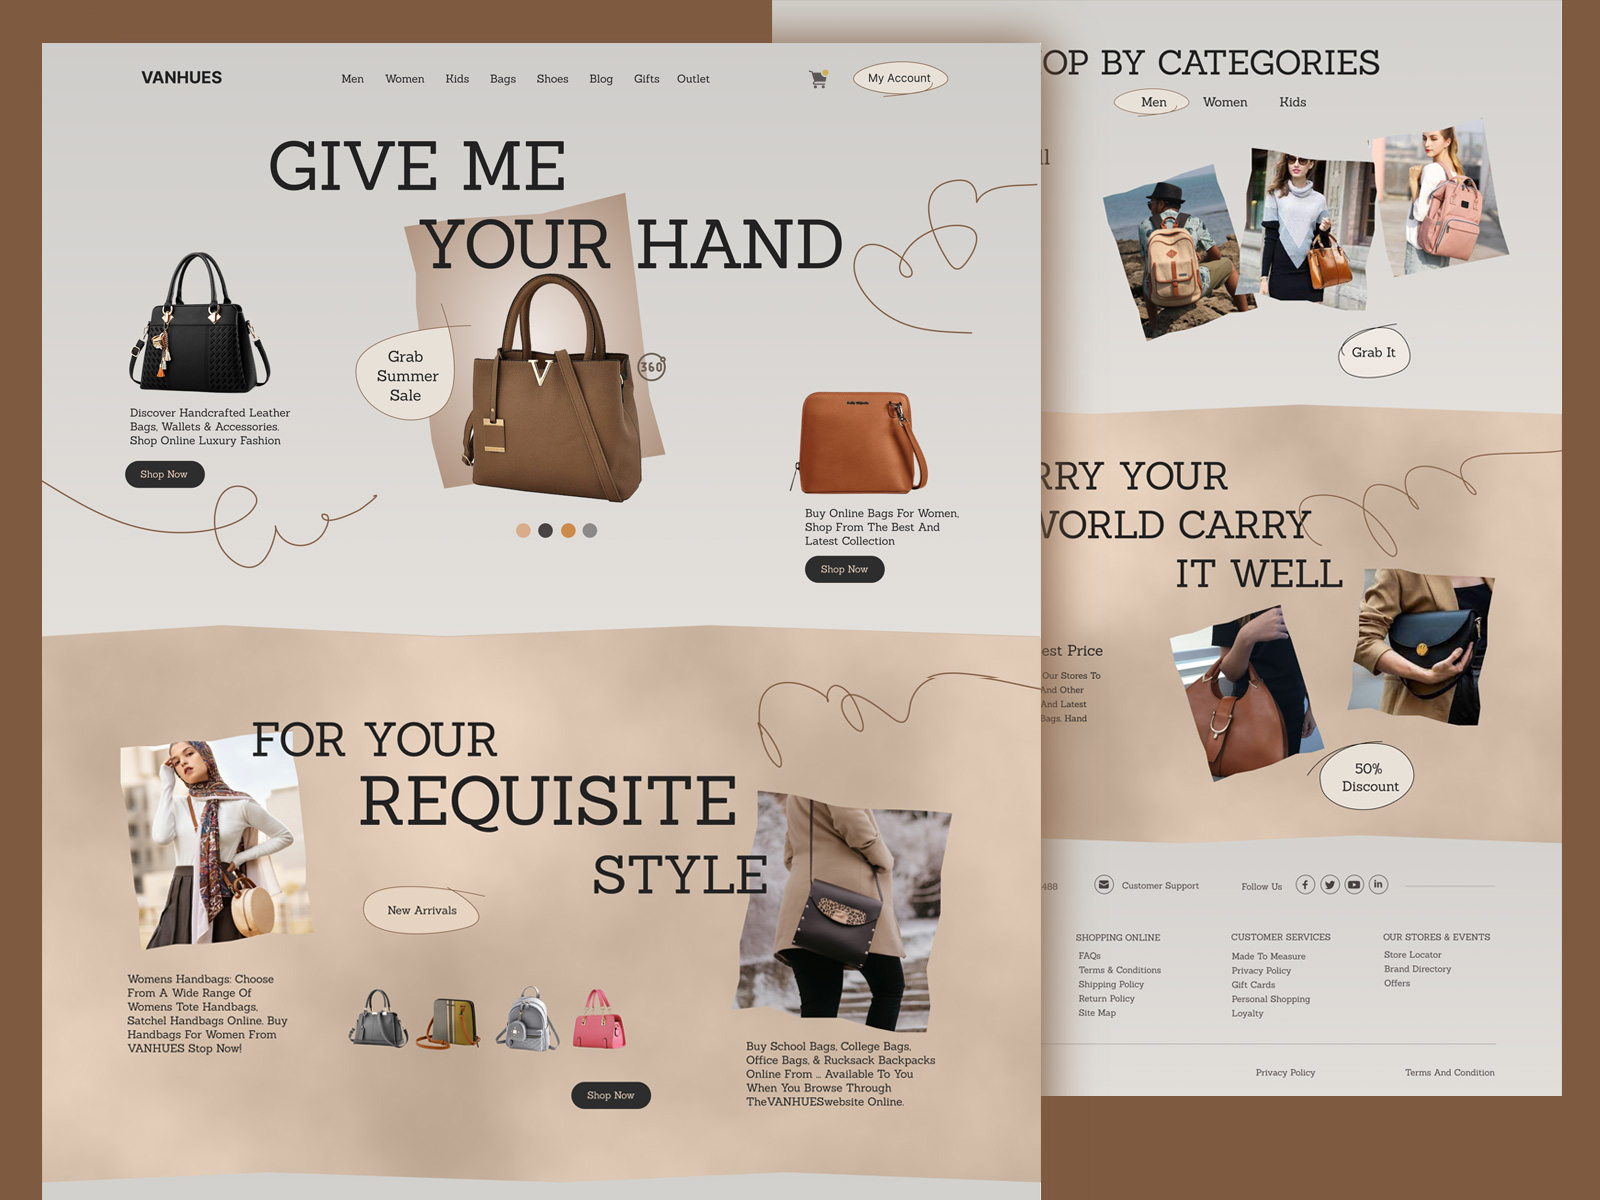 Bags items - Discover them on BagSTORE Shop